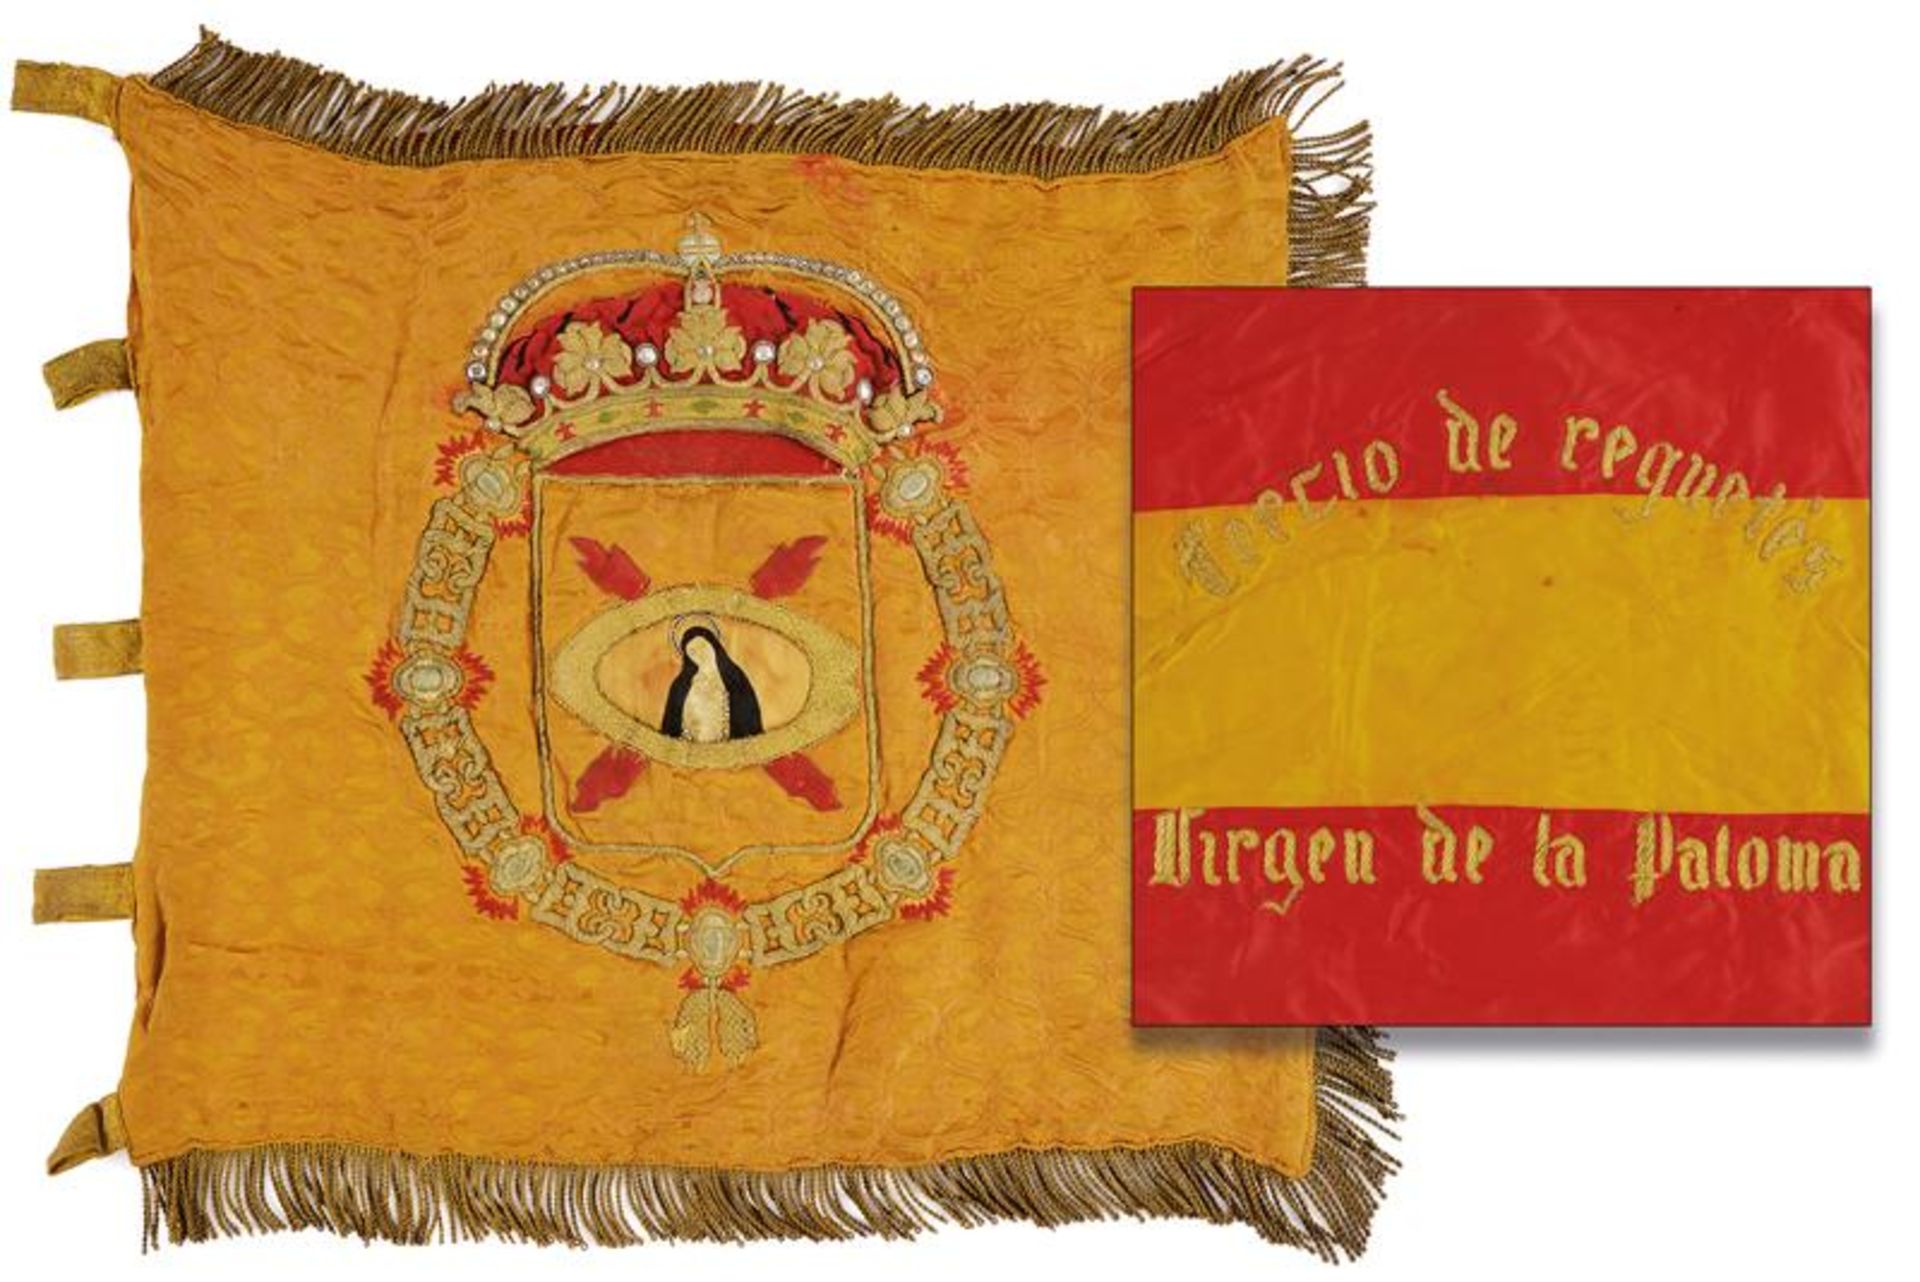 A military flag of the Carlist movement